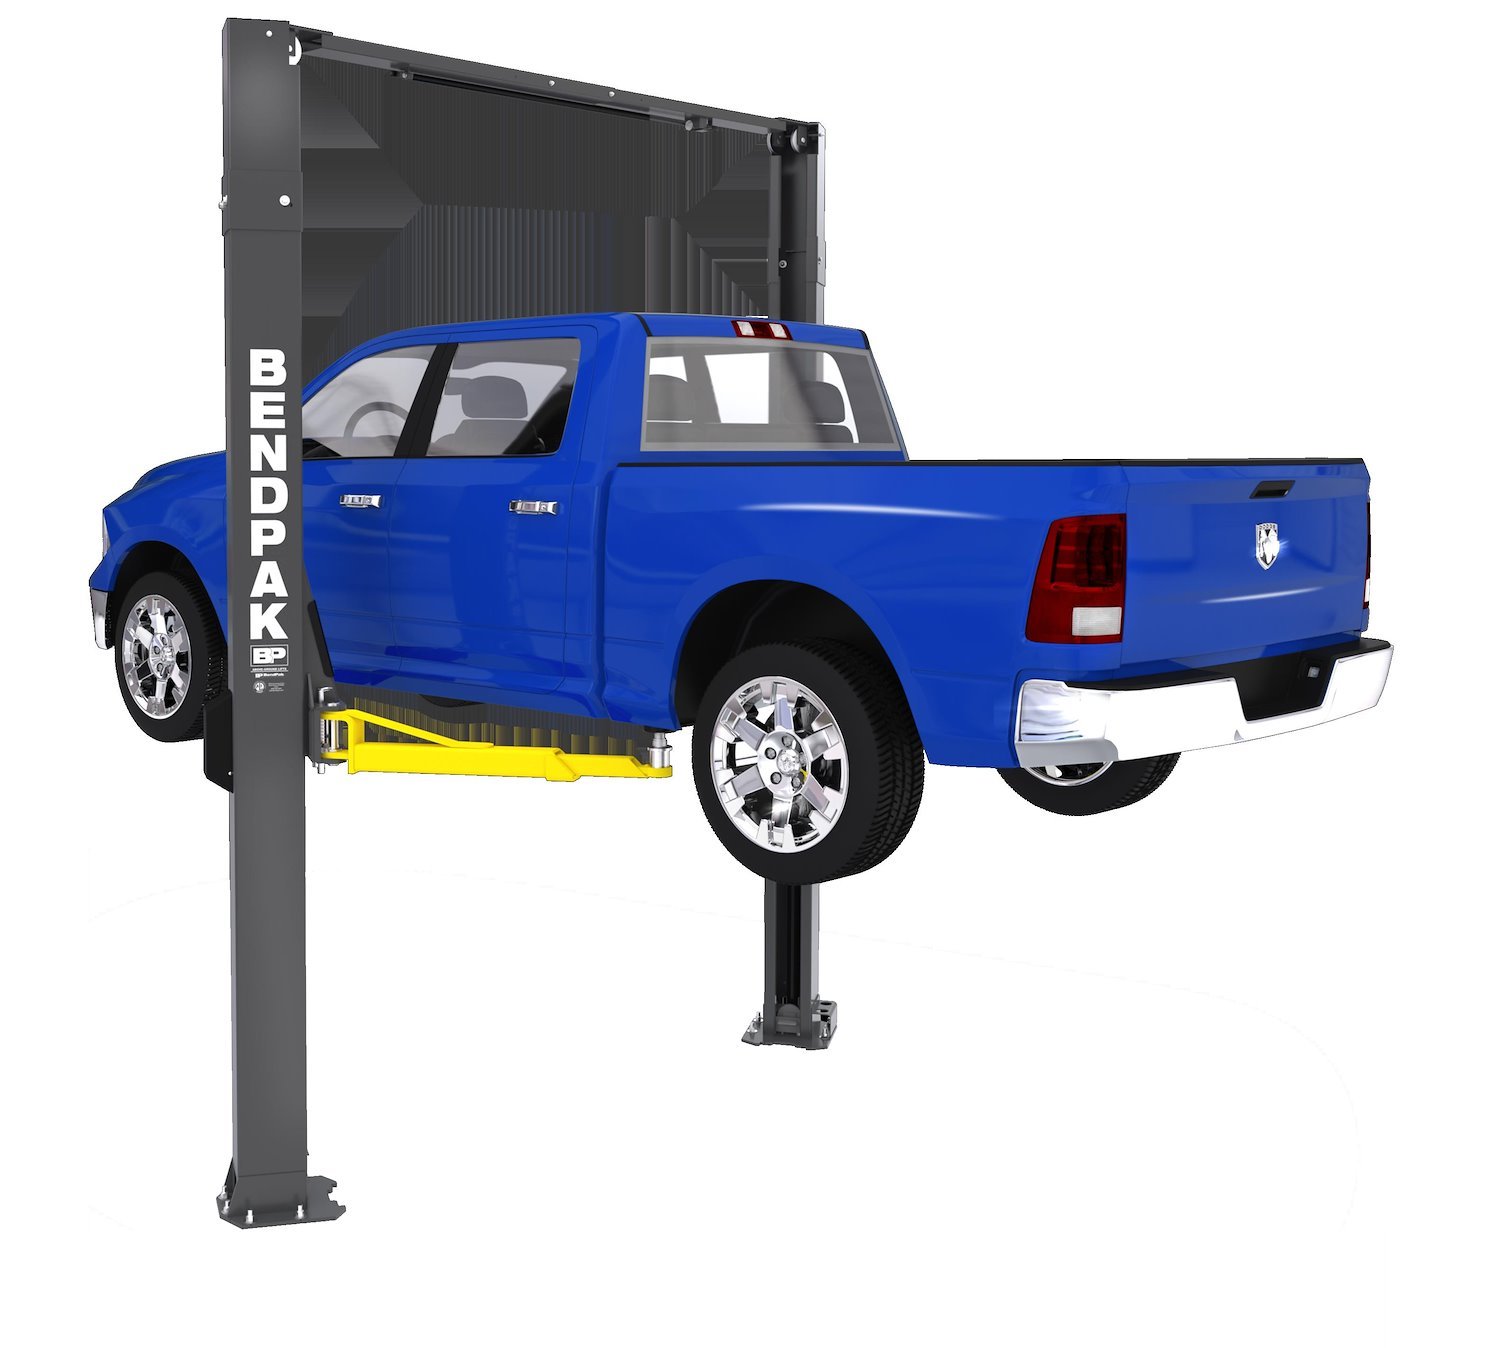 XPR-10AXLS-181 Extended Height Two-Post Lift, 10,000 lbs. Capacity